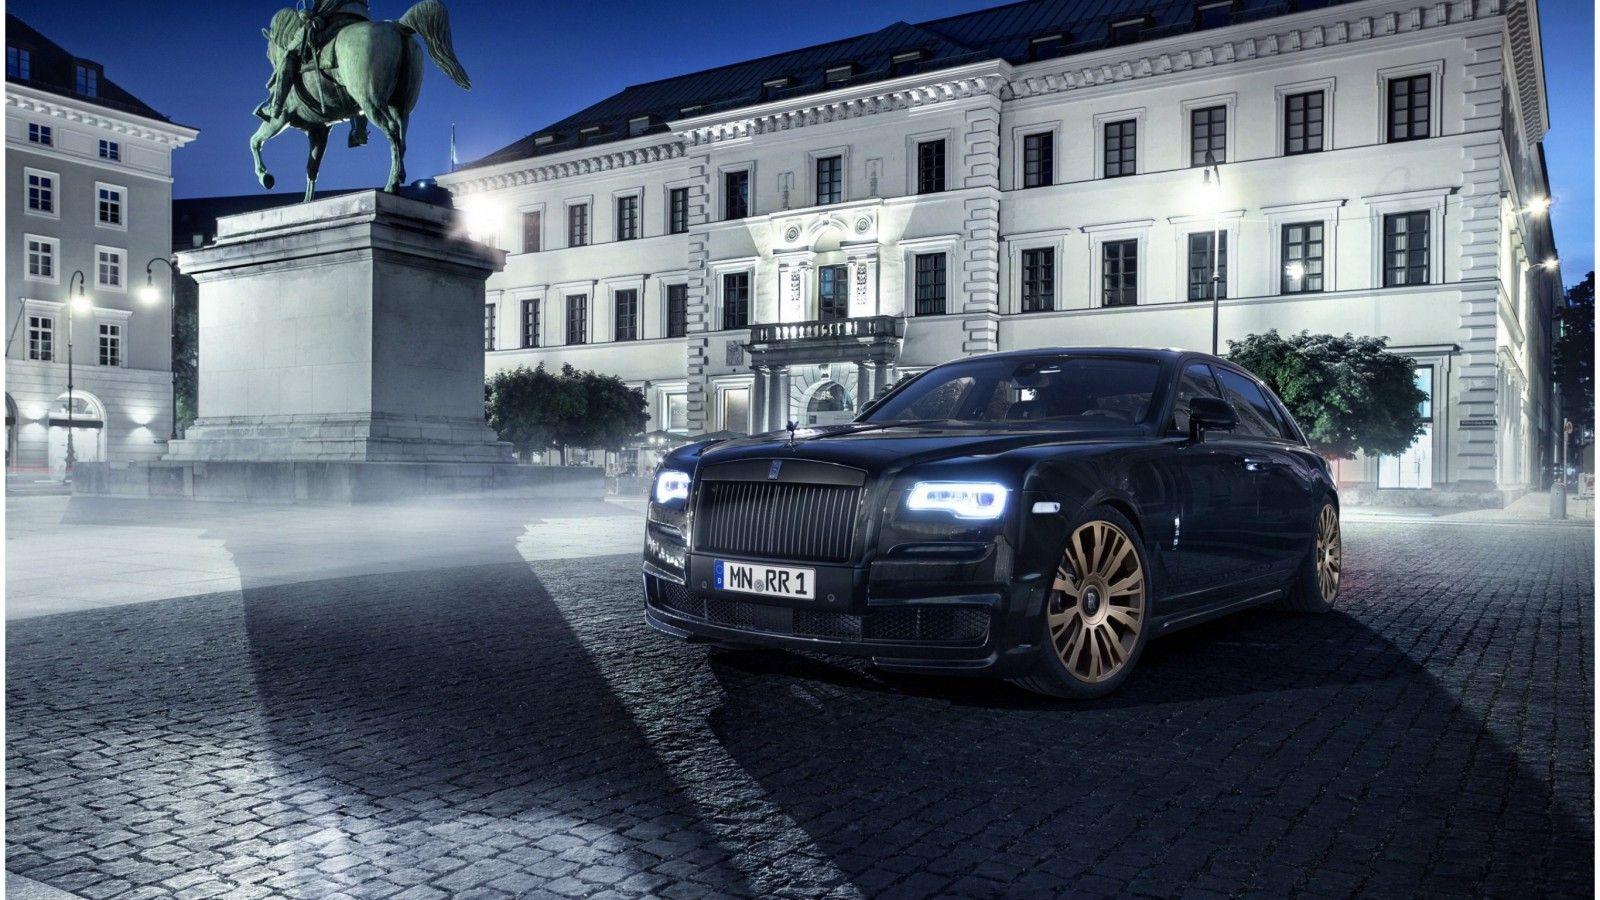 Wallpaper Rolls Royce Ghost Car HD > With Gost Cars Full Pics Of